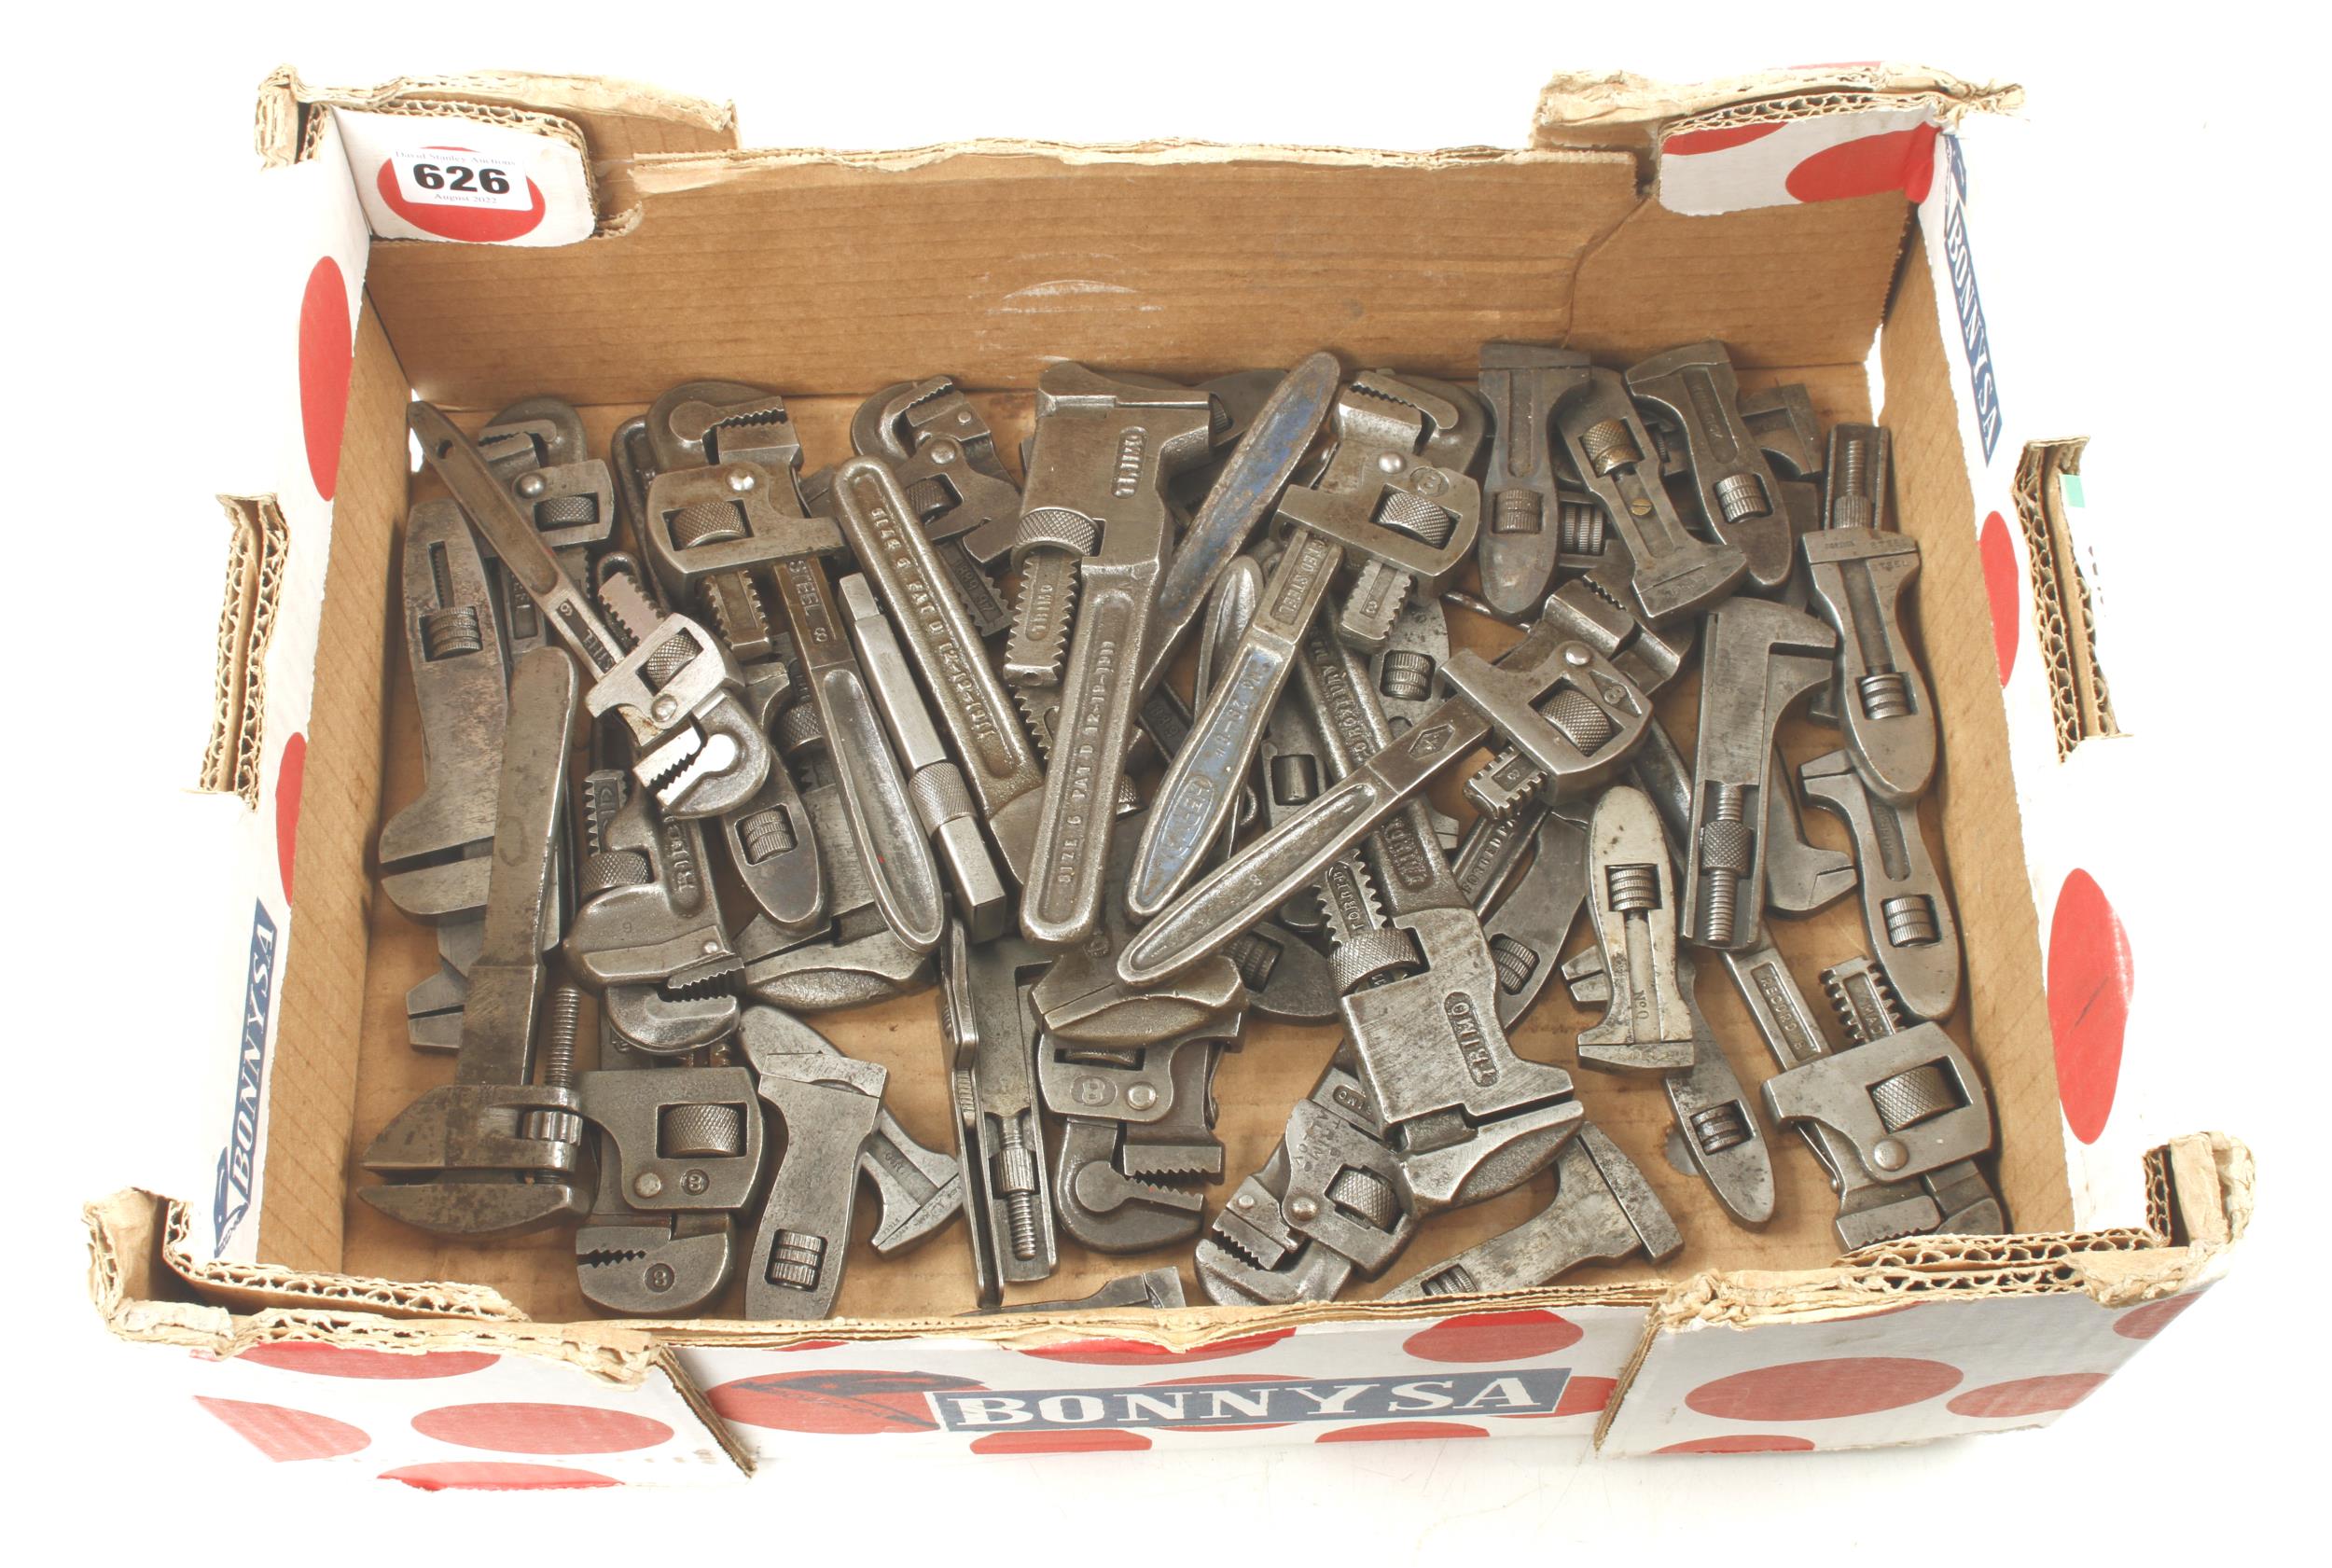 40 small adjustable wrenches etc G+ - Image 2 of 2